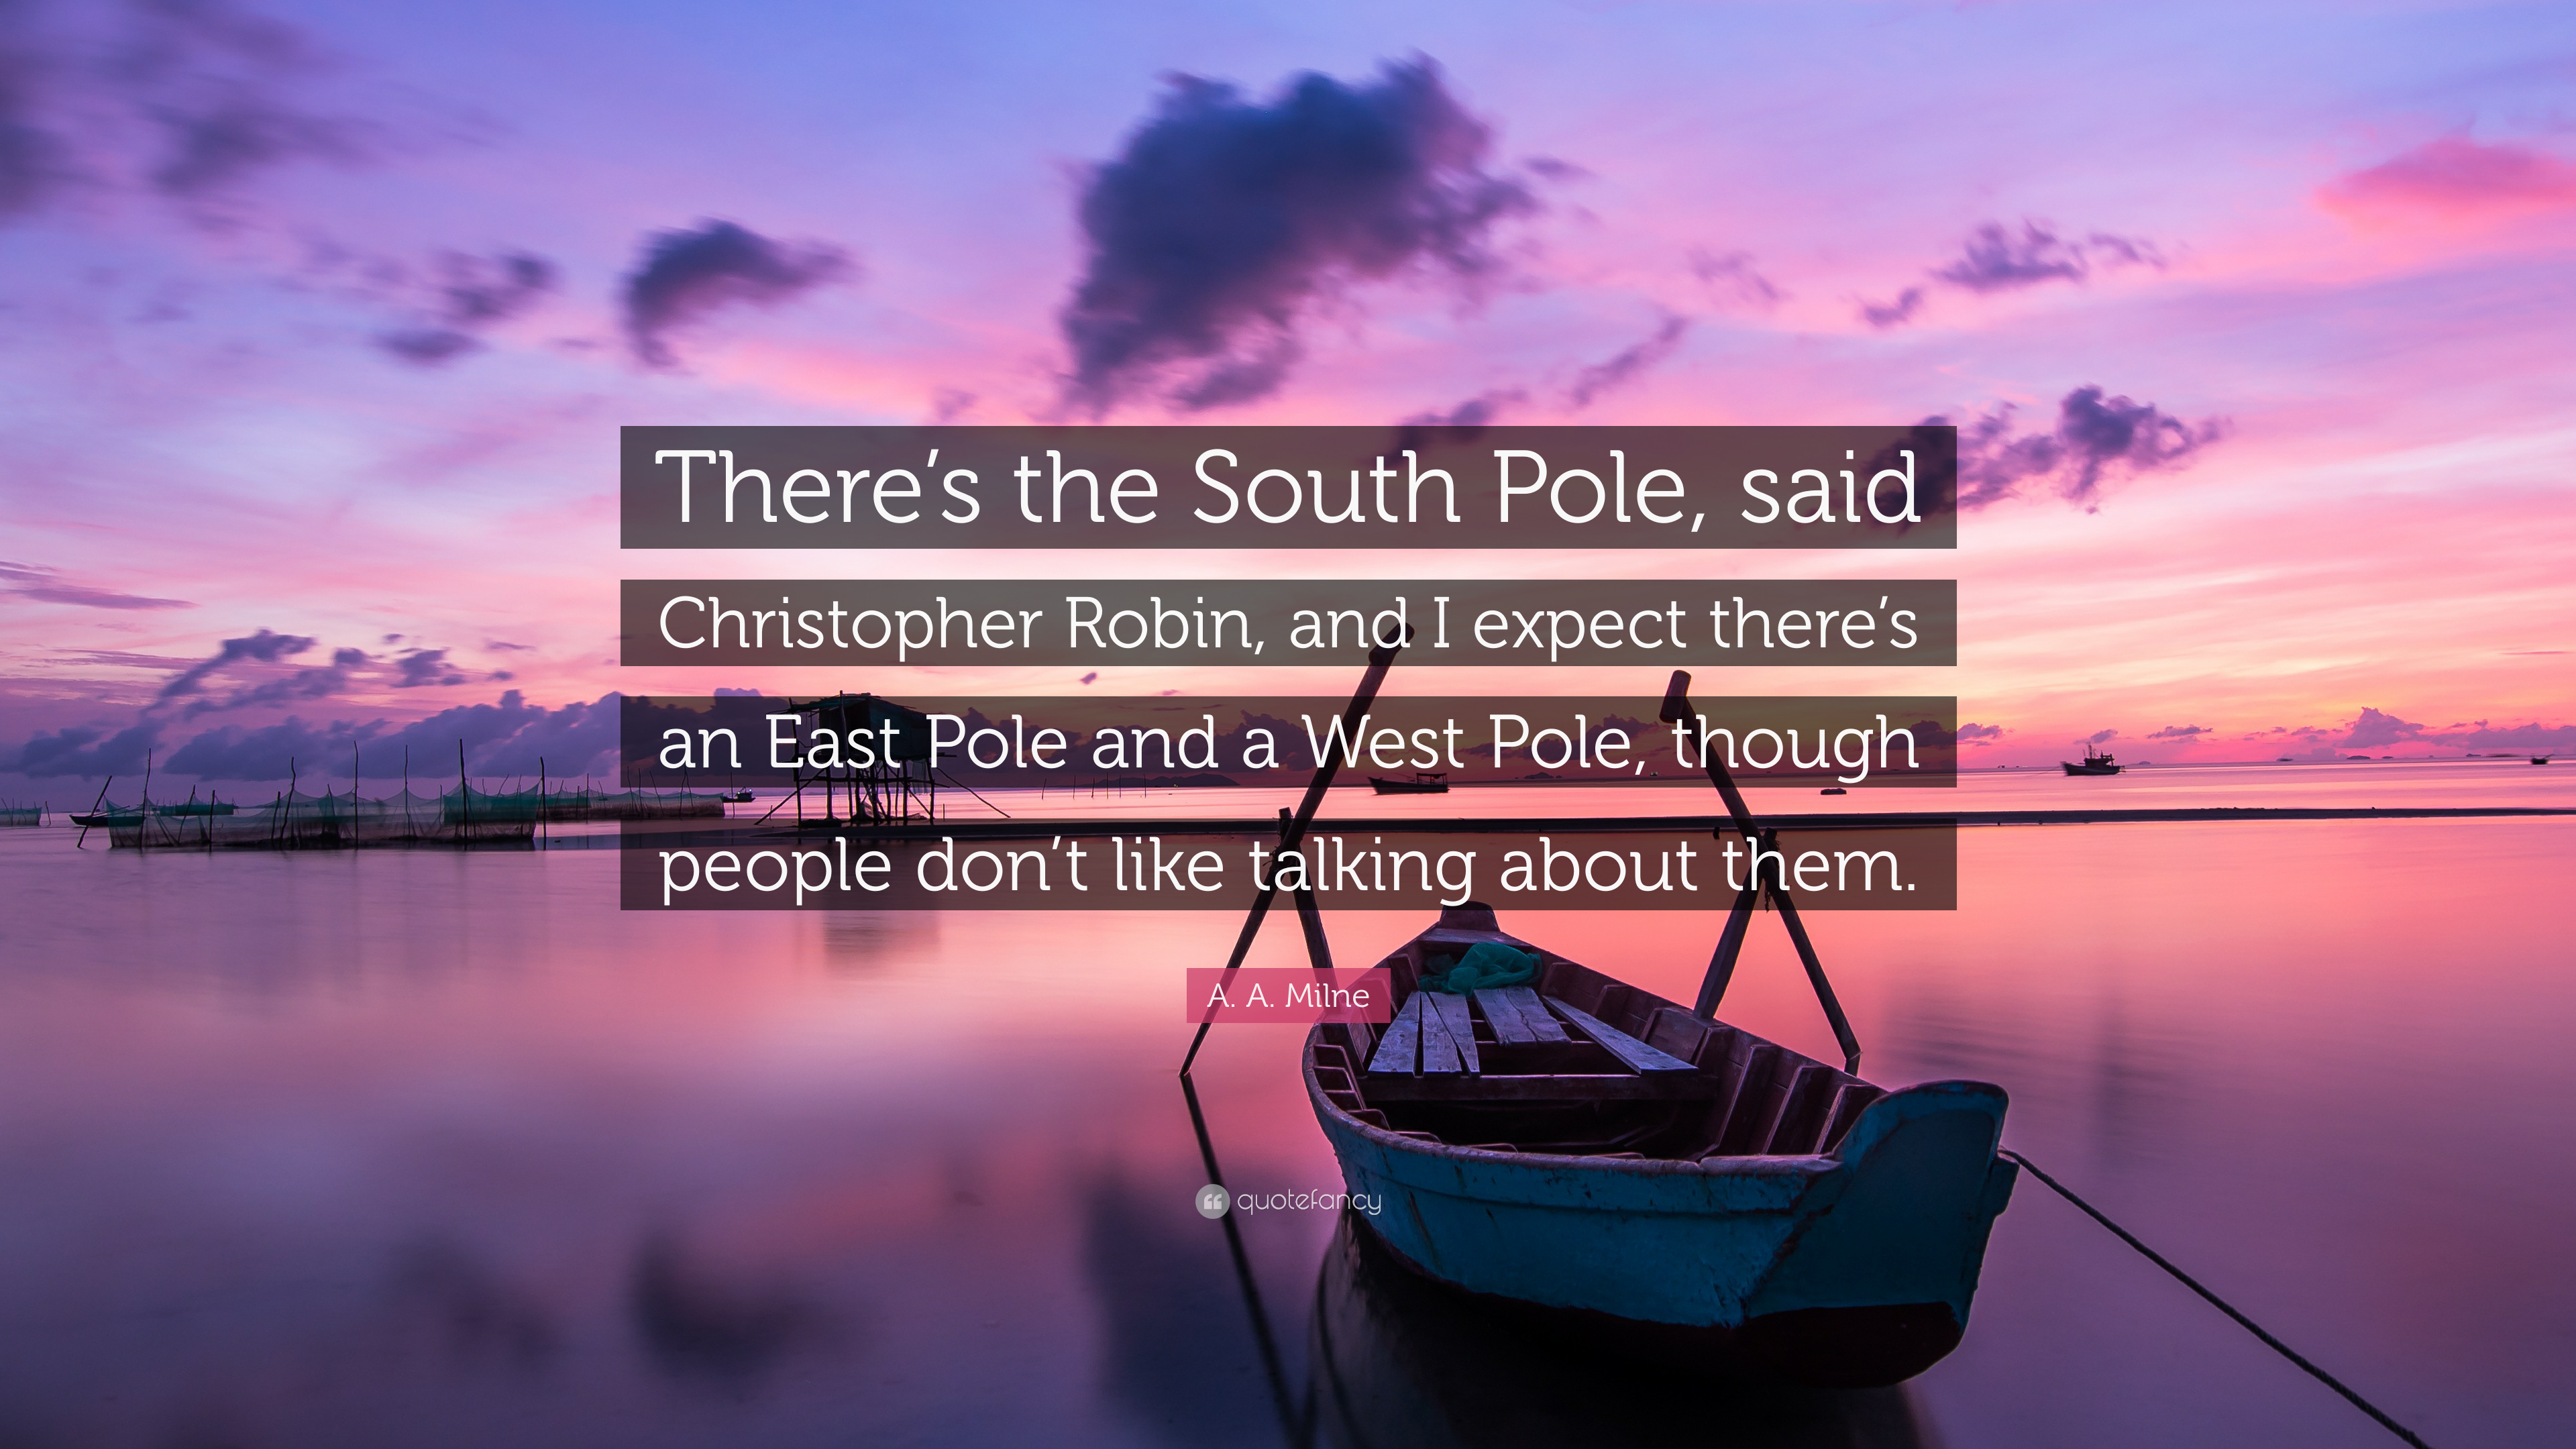 A. A. Milne Quote: “There's the South Pole, said Christopher Robin